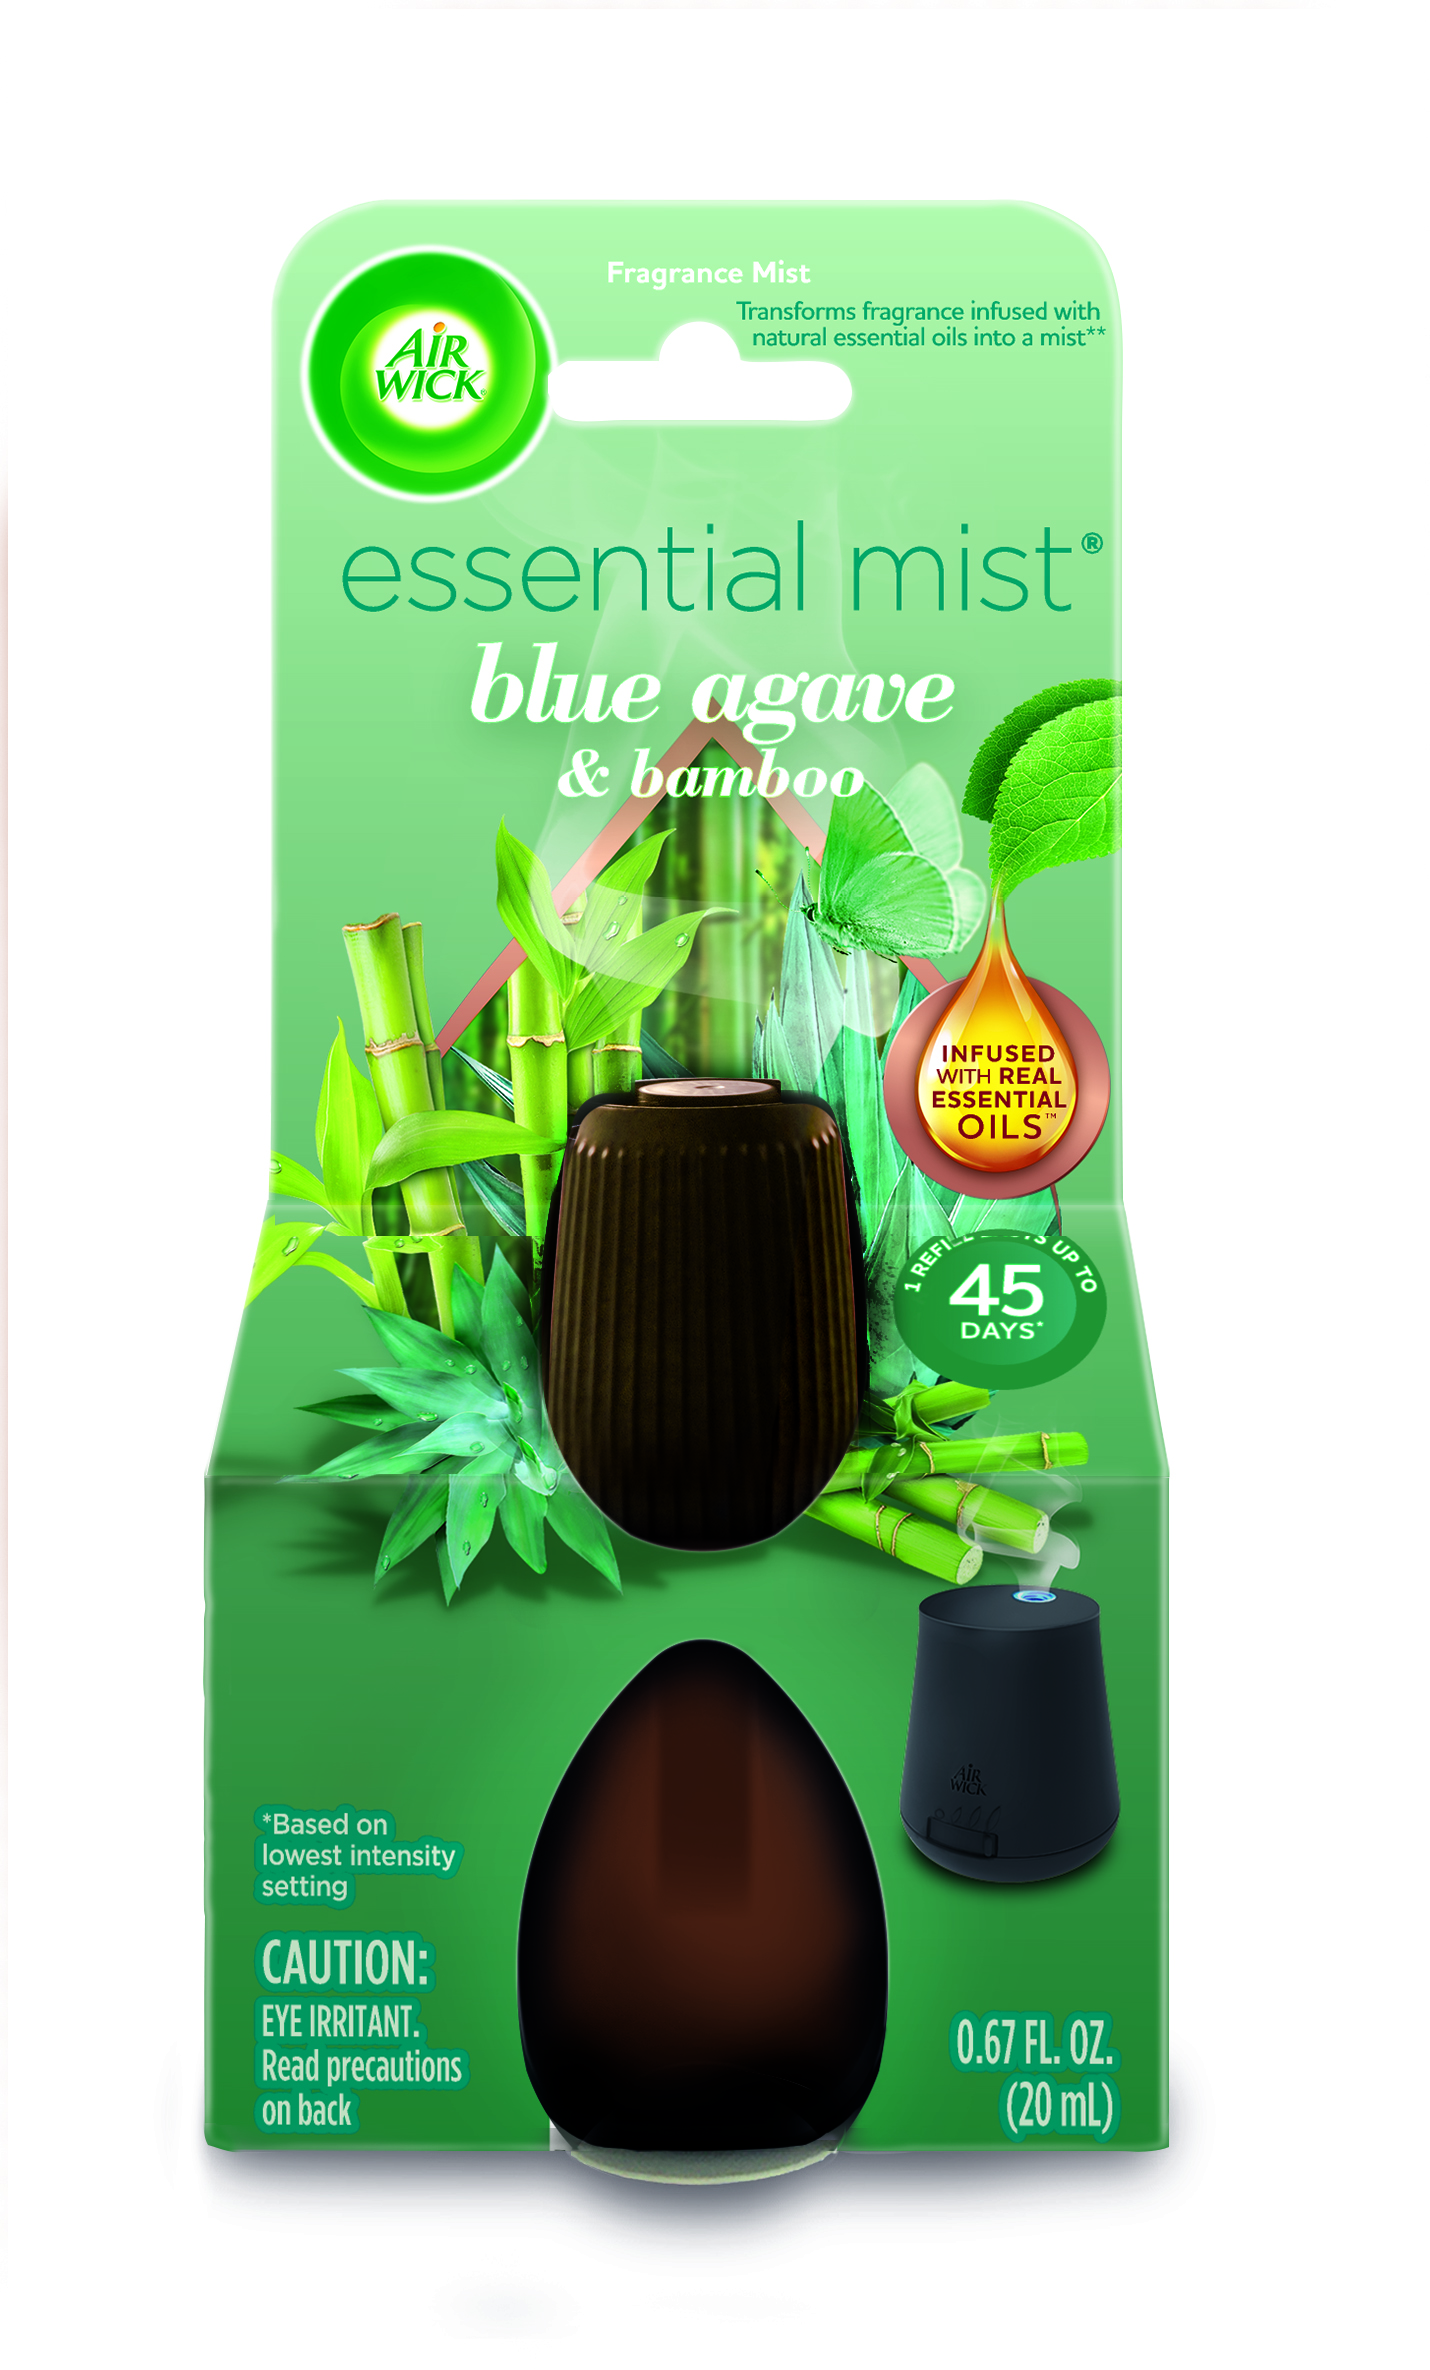 AIR WICK Essential Mist  Blue Agave  Bamboo